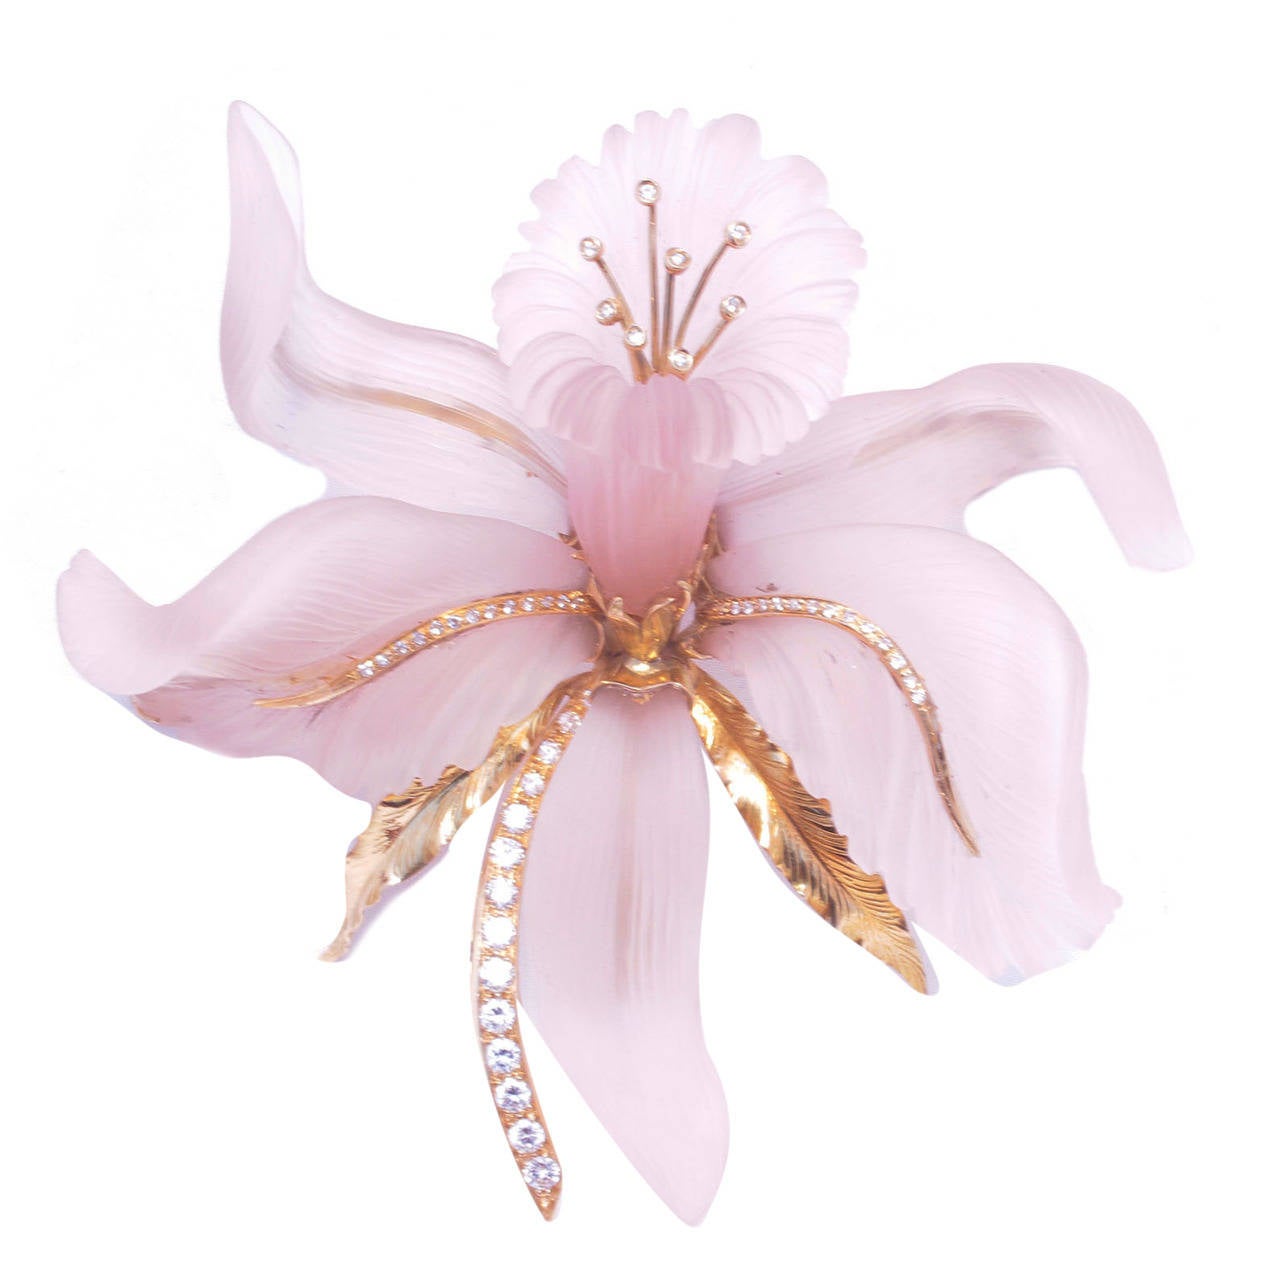 SaiDian 1Pcs Orchid Brooch Fashion Pretty Crystal Flower Pin Pendant Large Brooches for Women 